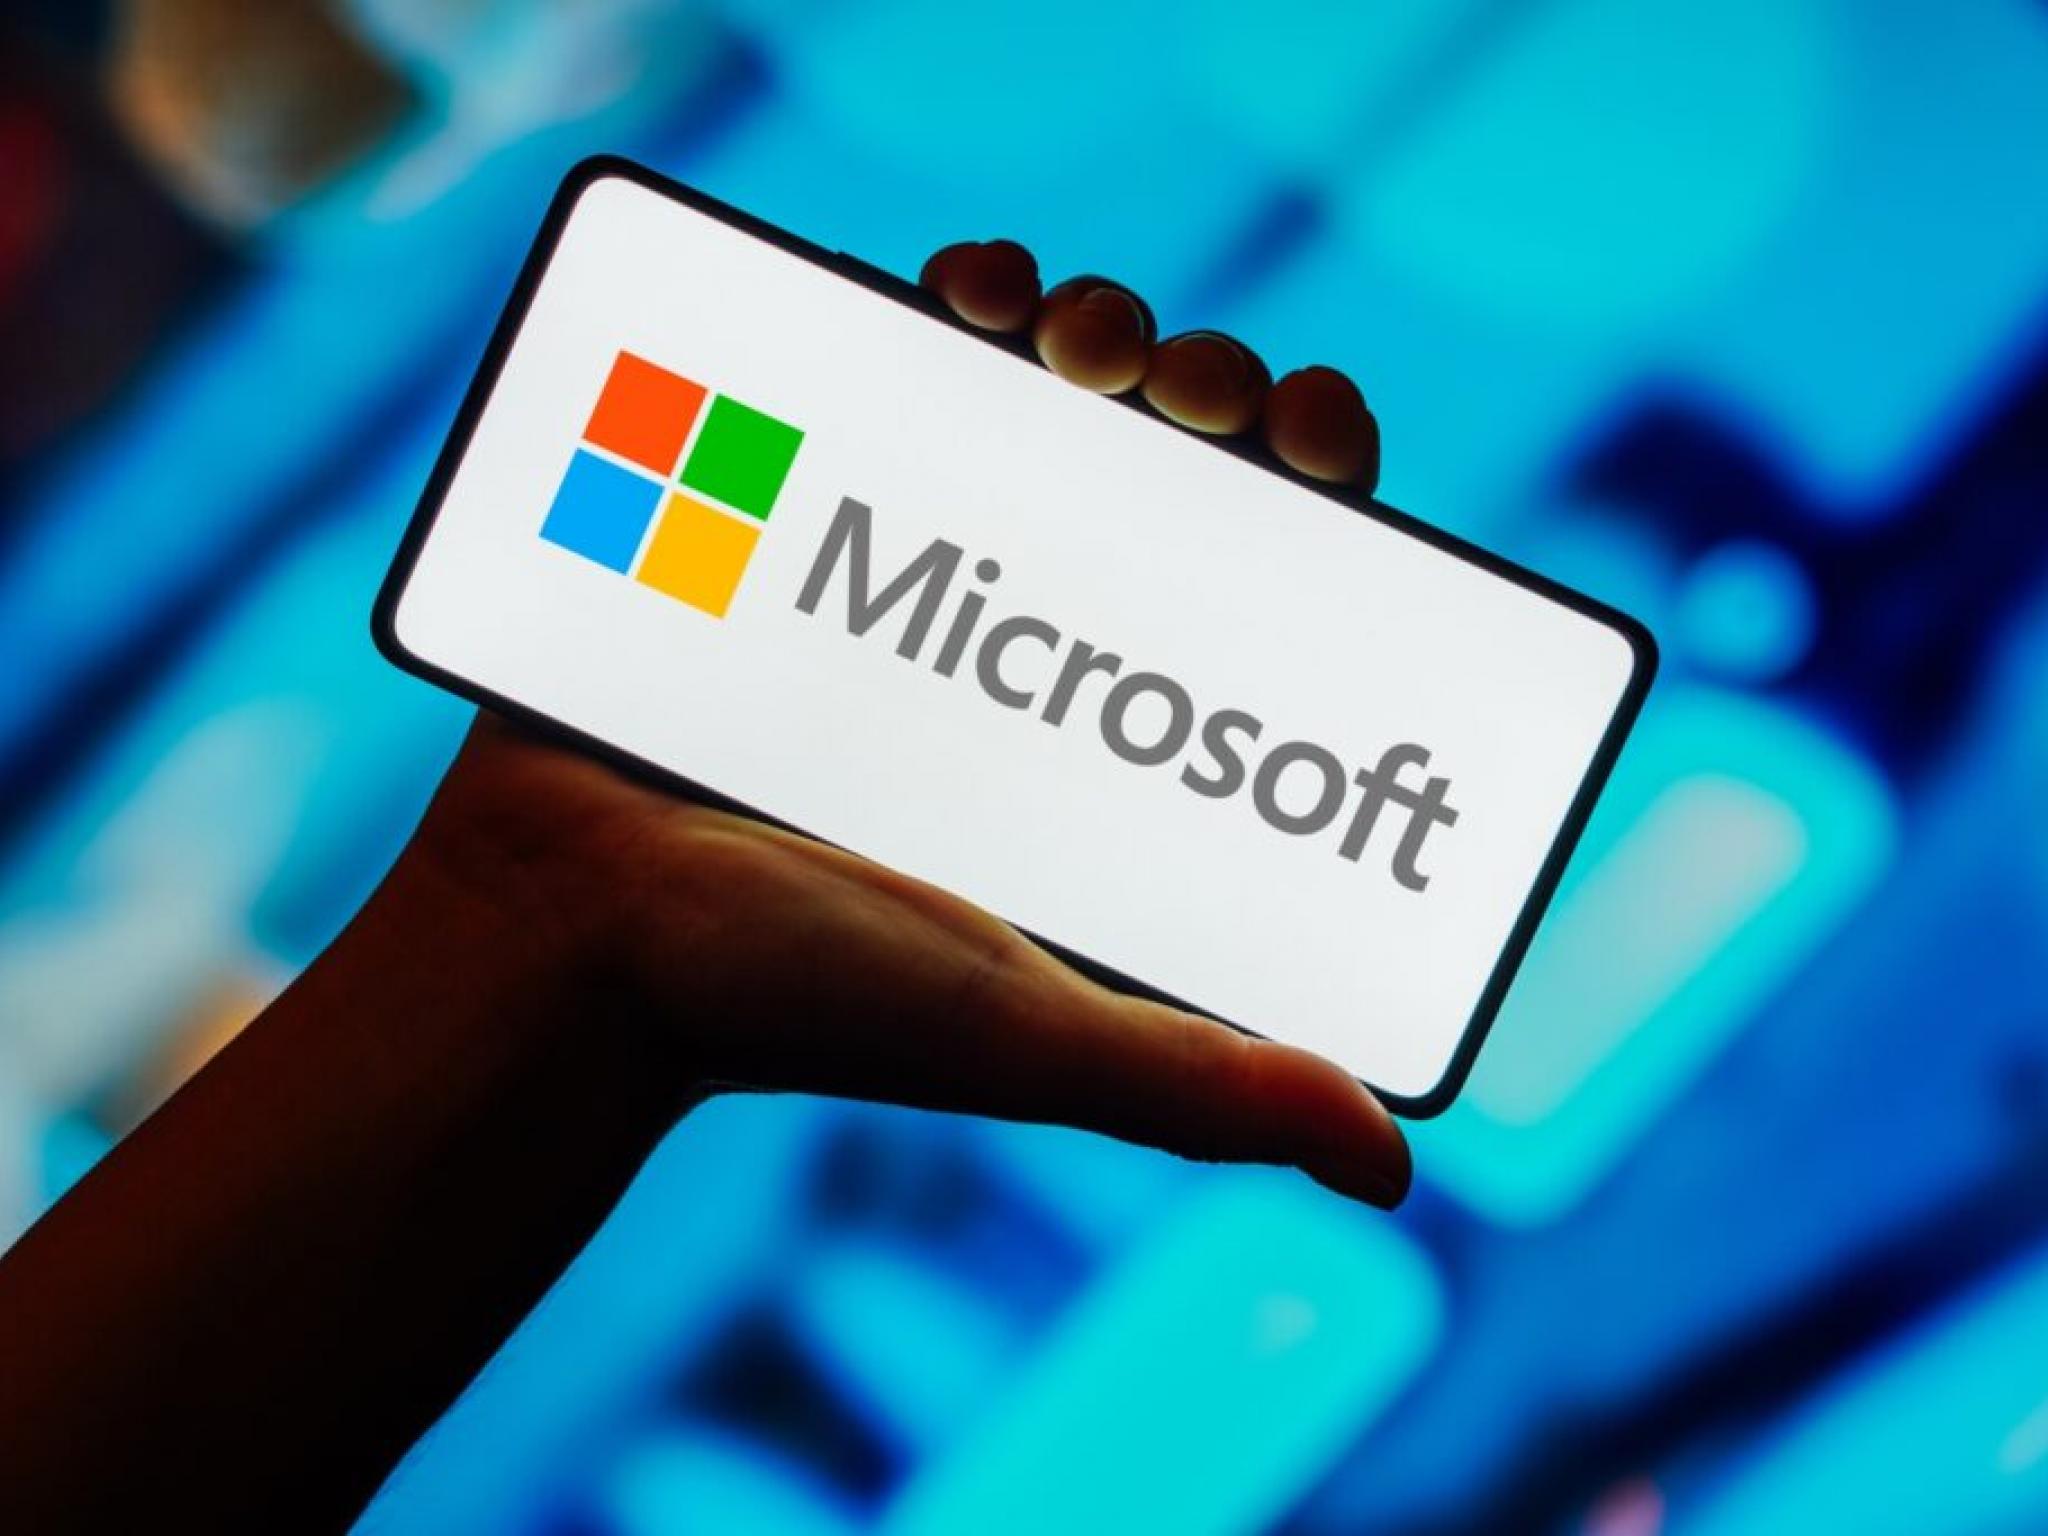  microsoft-in-unique-position-to-scale-gen-ai-revenue-goldman-sachs-says-ahead-of-q3-earnings 